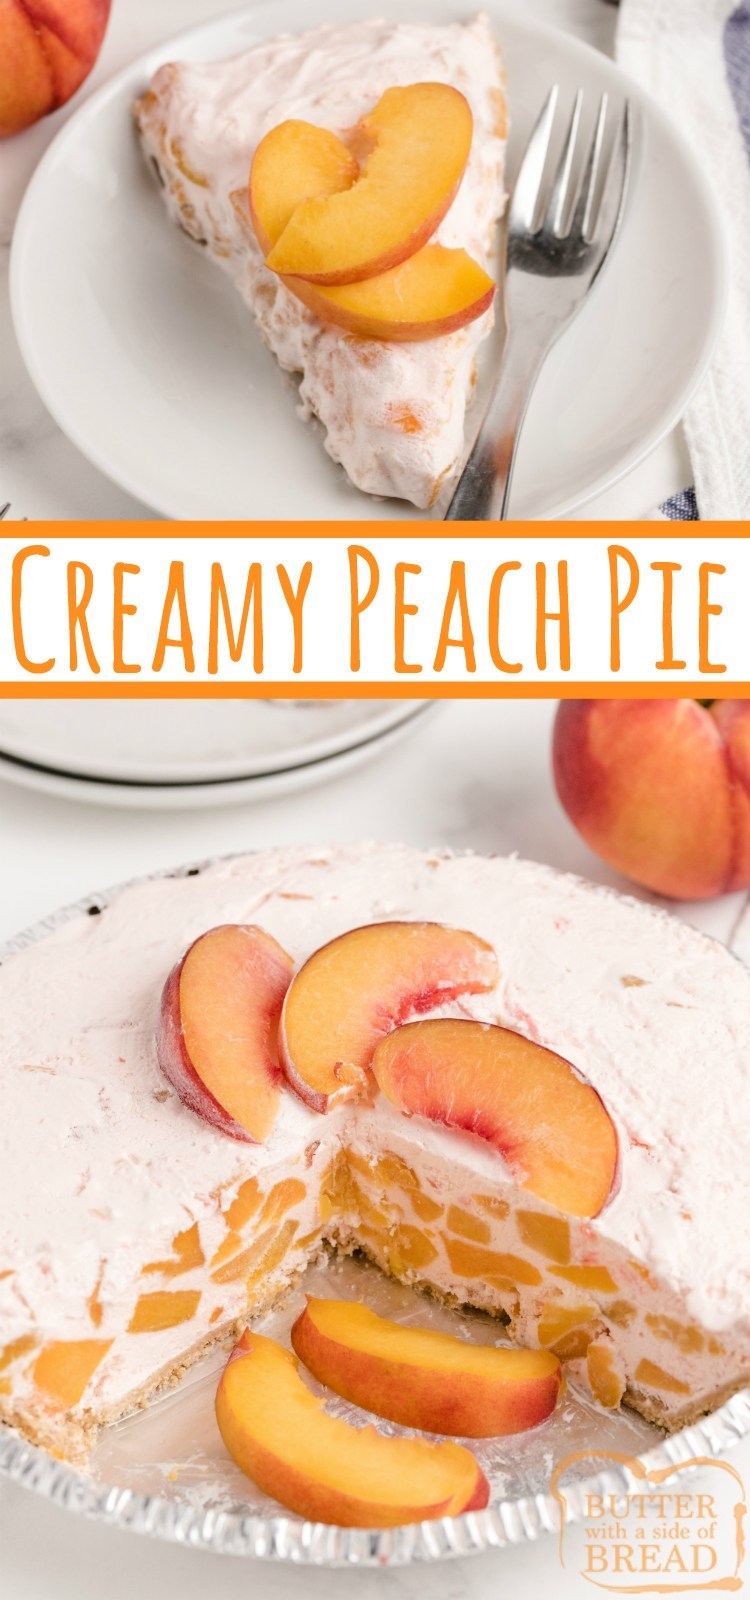 Creamy Peach Pie is made with only 5 ingredients in less than five minutes! Peach Jell-O, vanilla ice cream and fresh peaches are combined into a delicious, no-bake pie recipe!